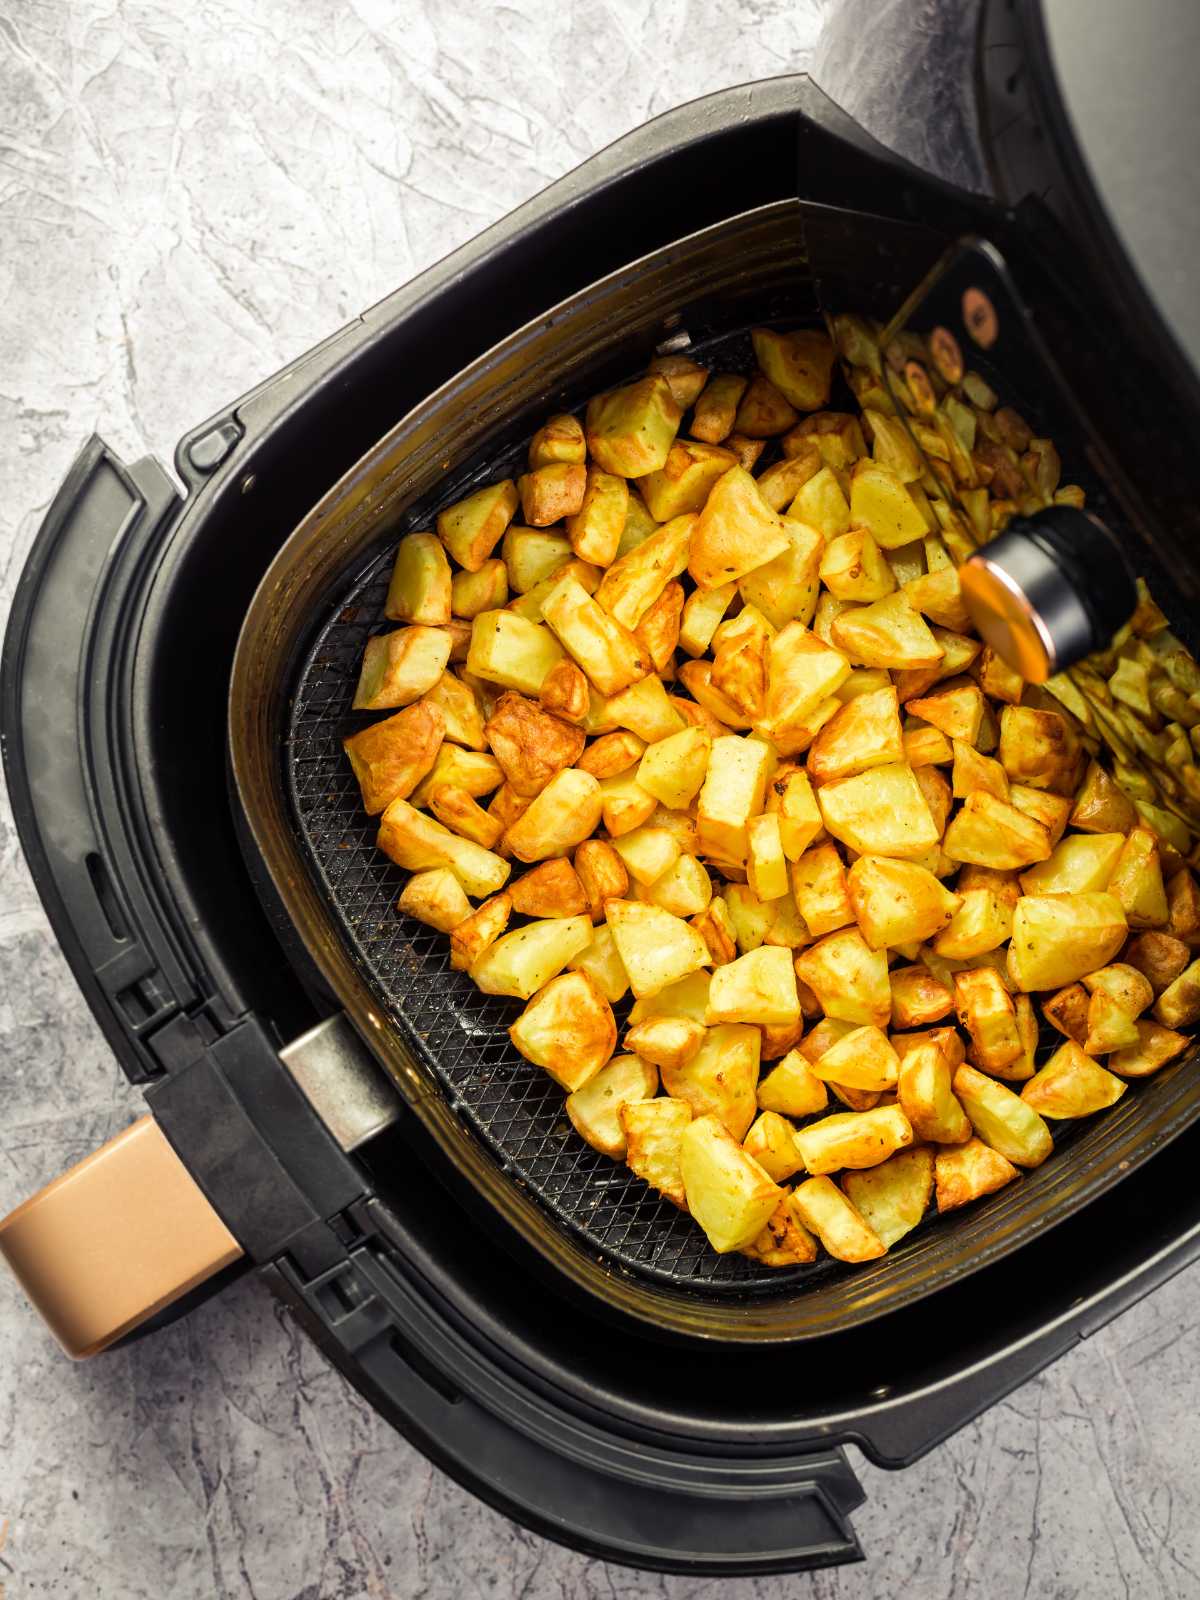 Can You Put Water in an Air Fryer? Here's What You Should Know